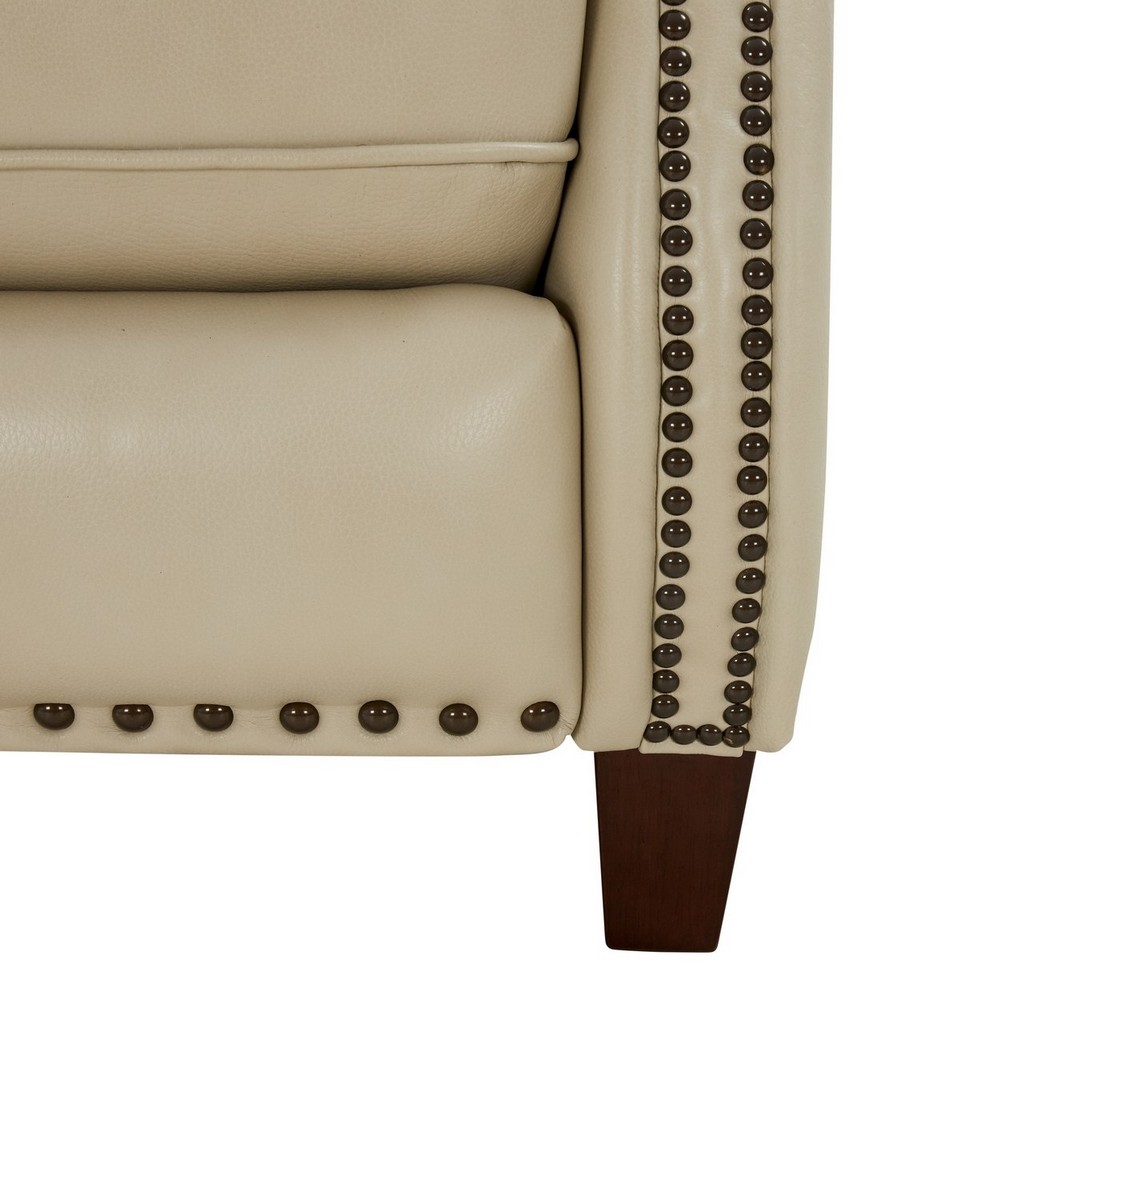 Barcalounger Melrose Recliner Chair - Barone Parchment/All Leather